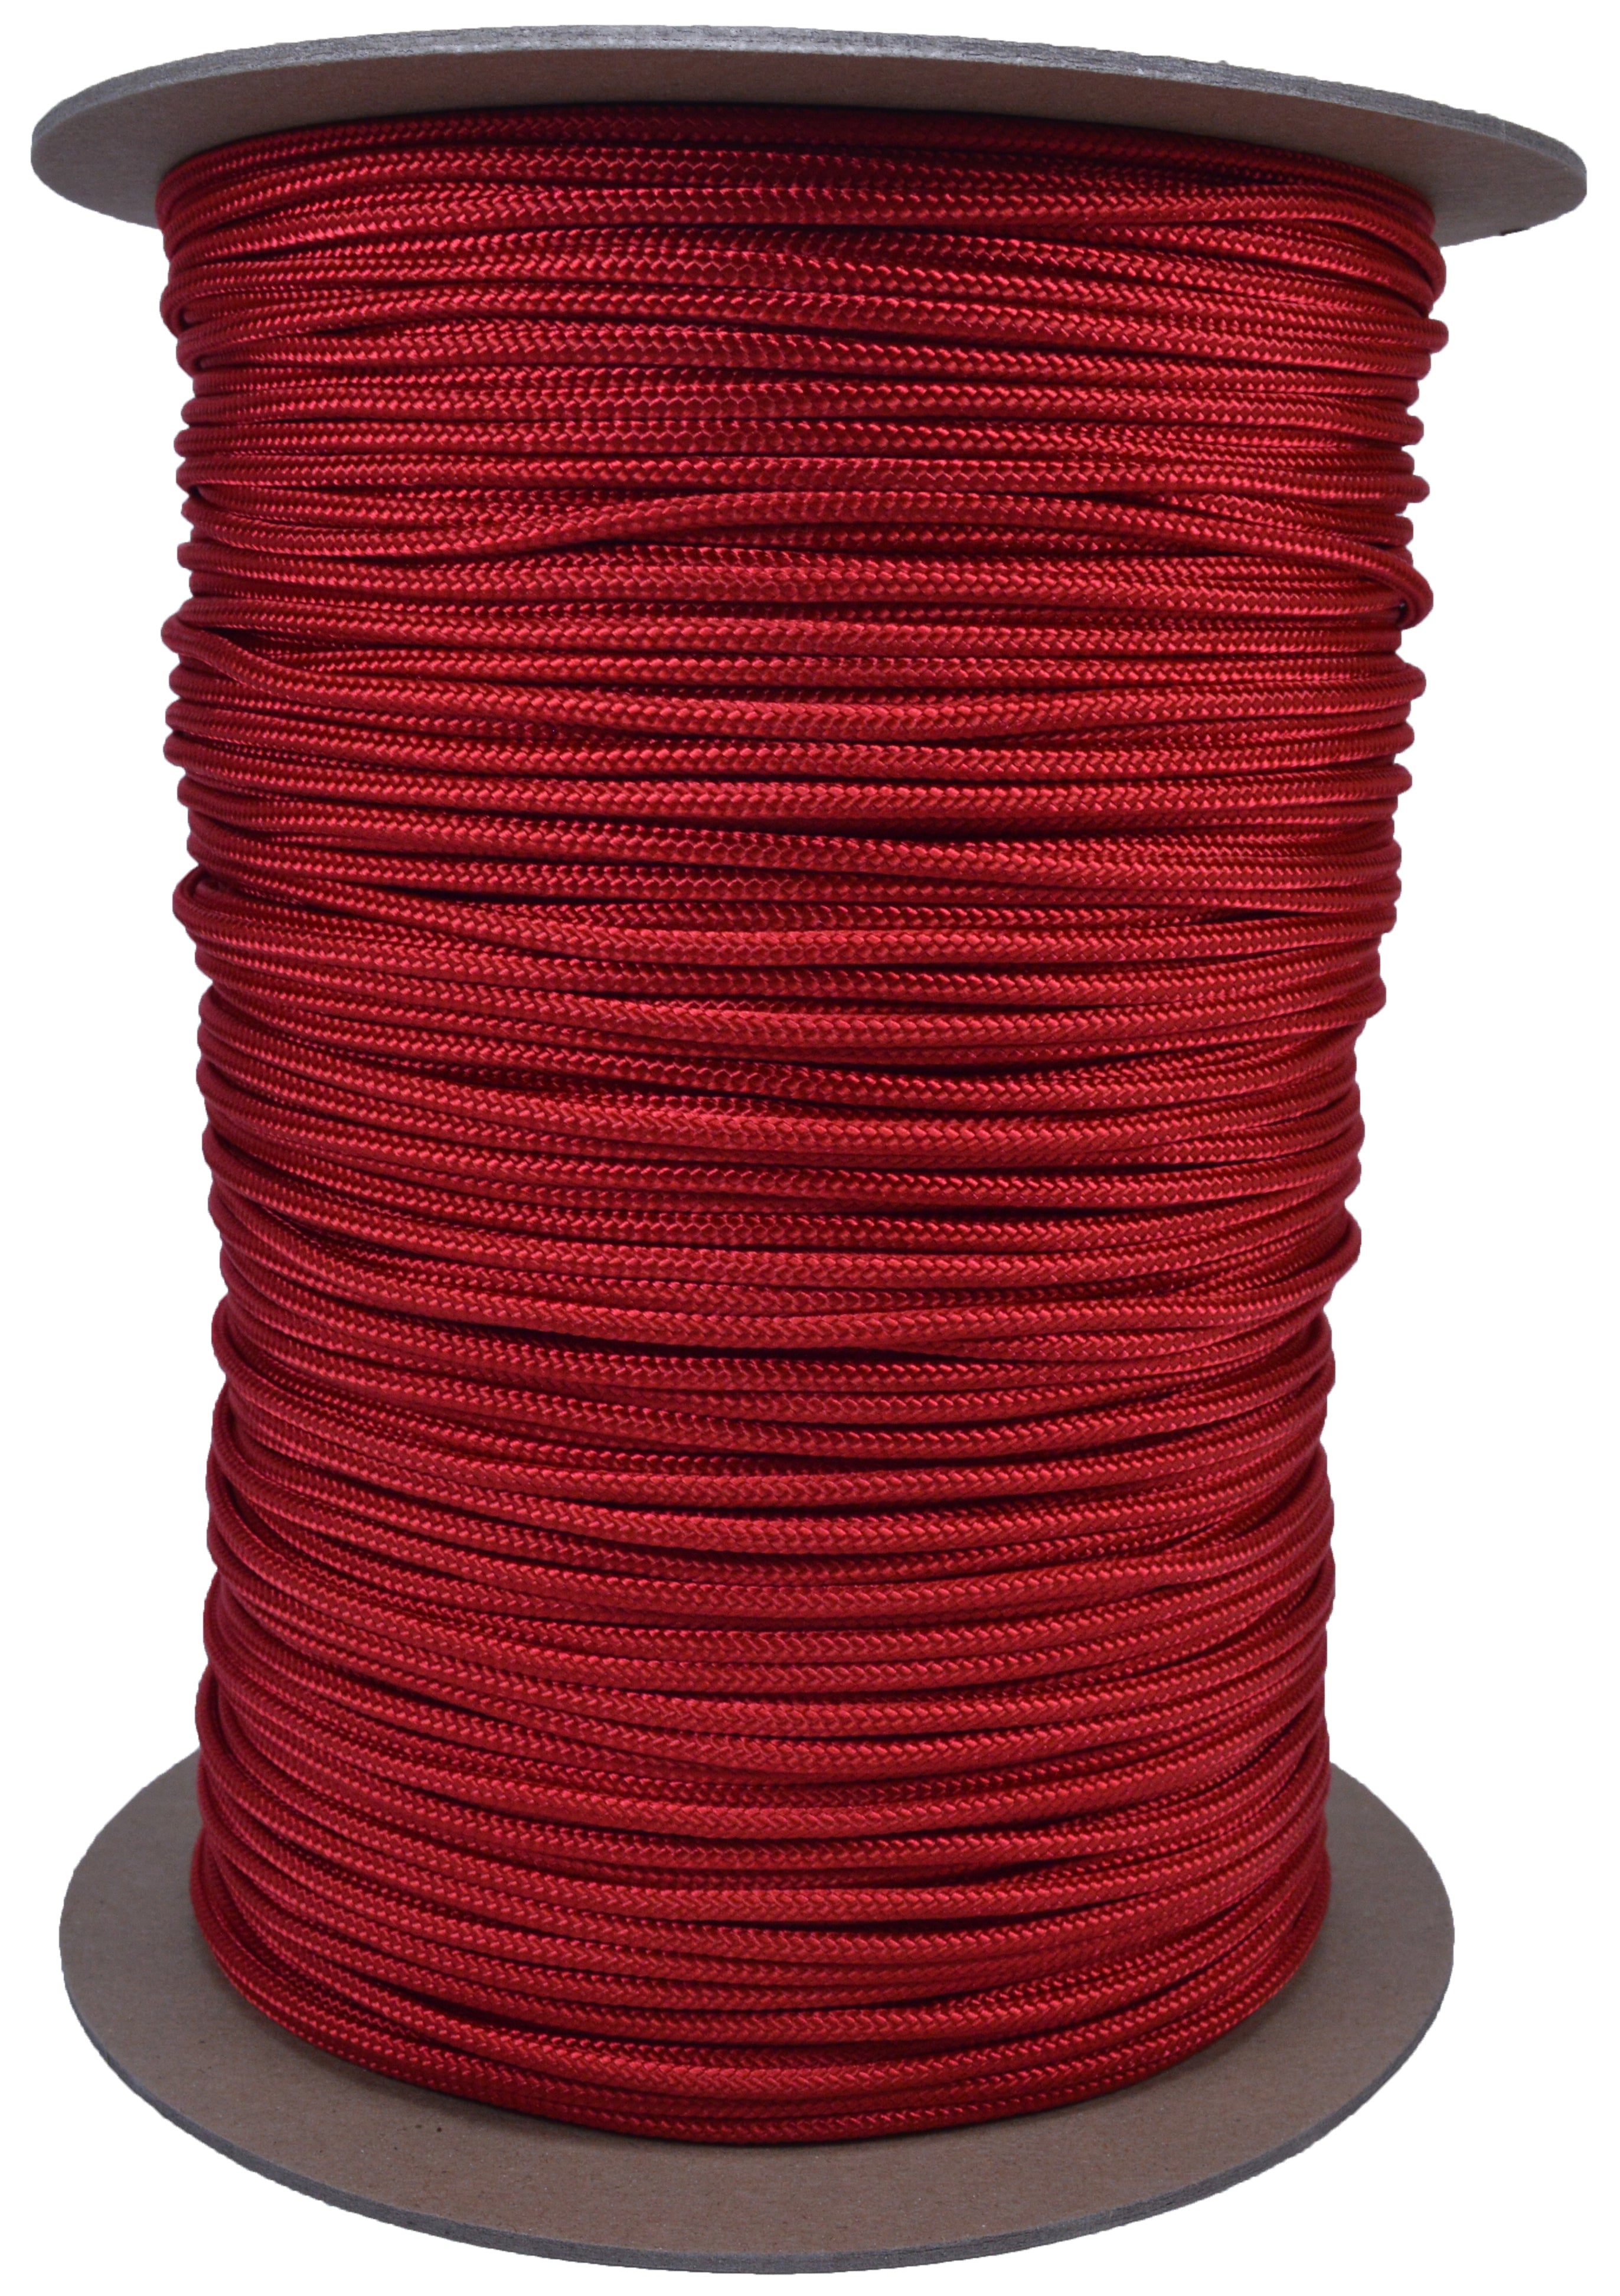 West Coast Paracord, 325 Paracord Certified Commercial Grade Type II 3mm  Thickness 325LB Tensile Strength Parachute Cord